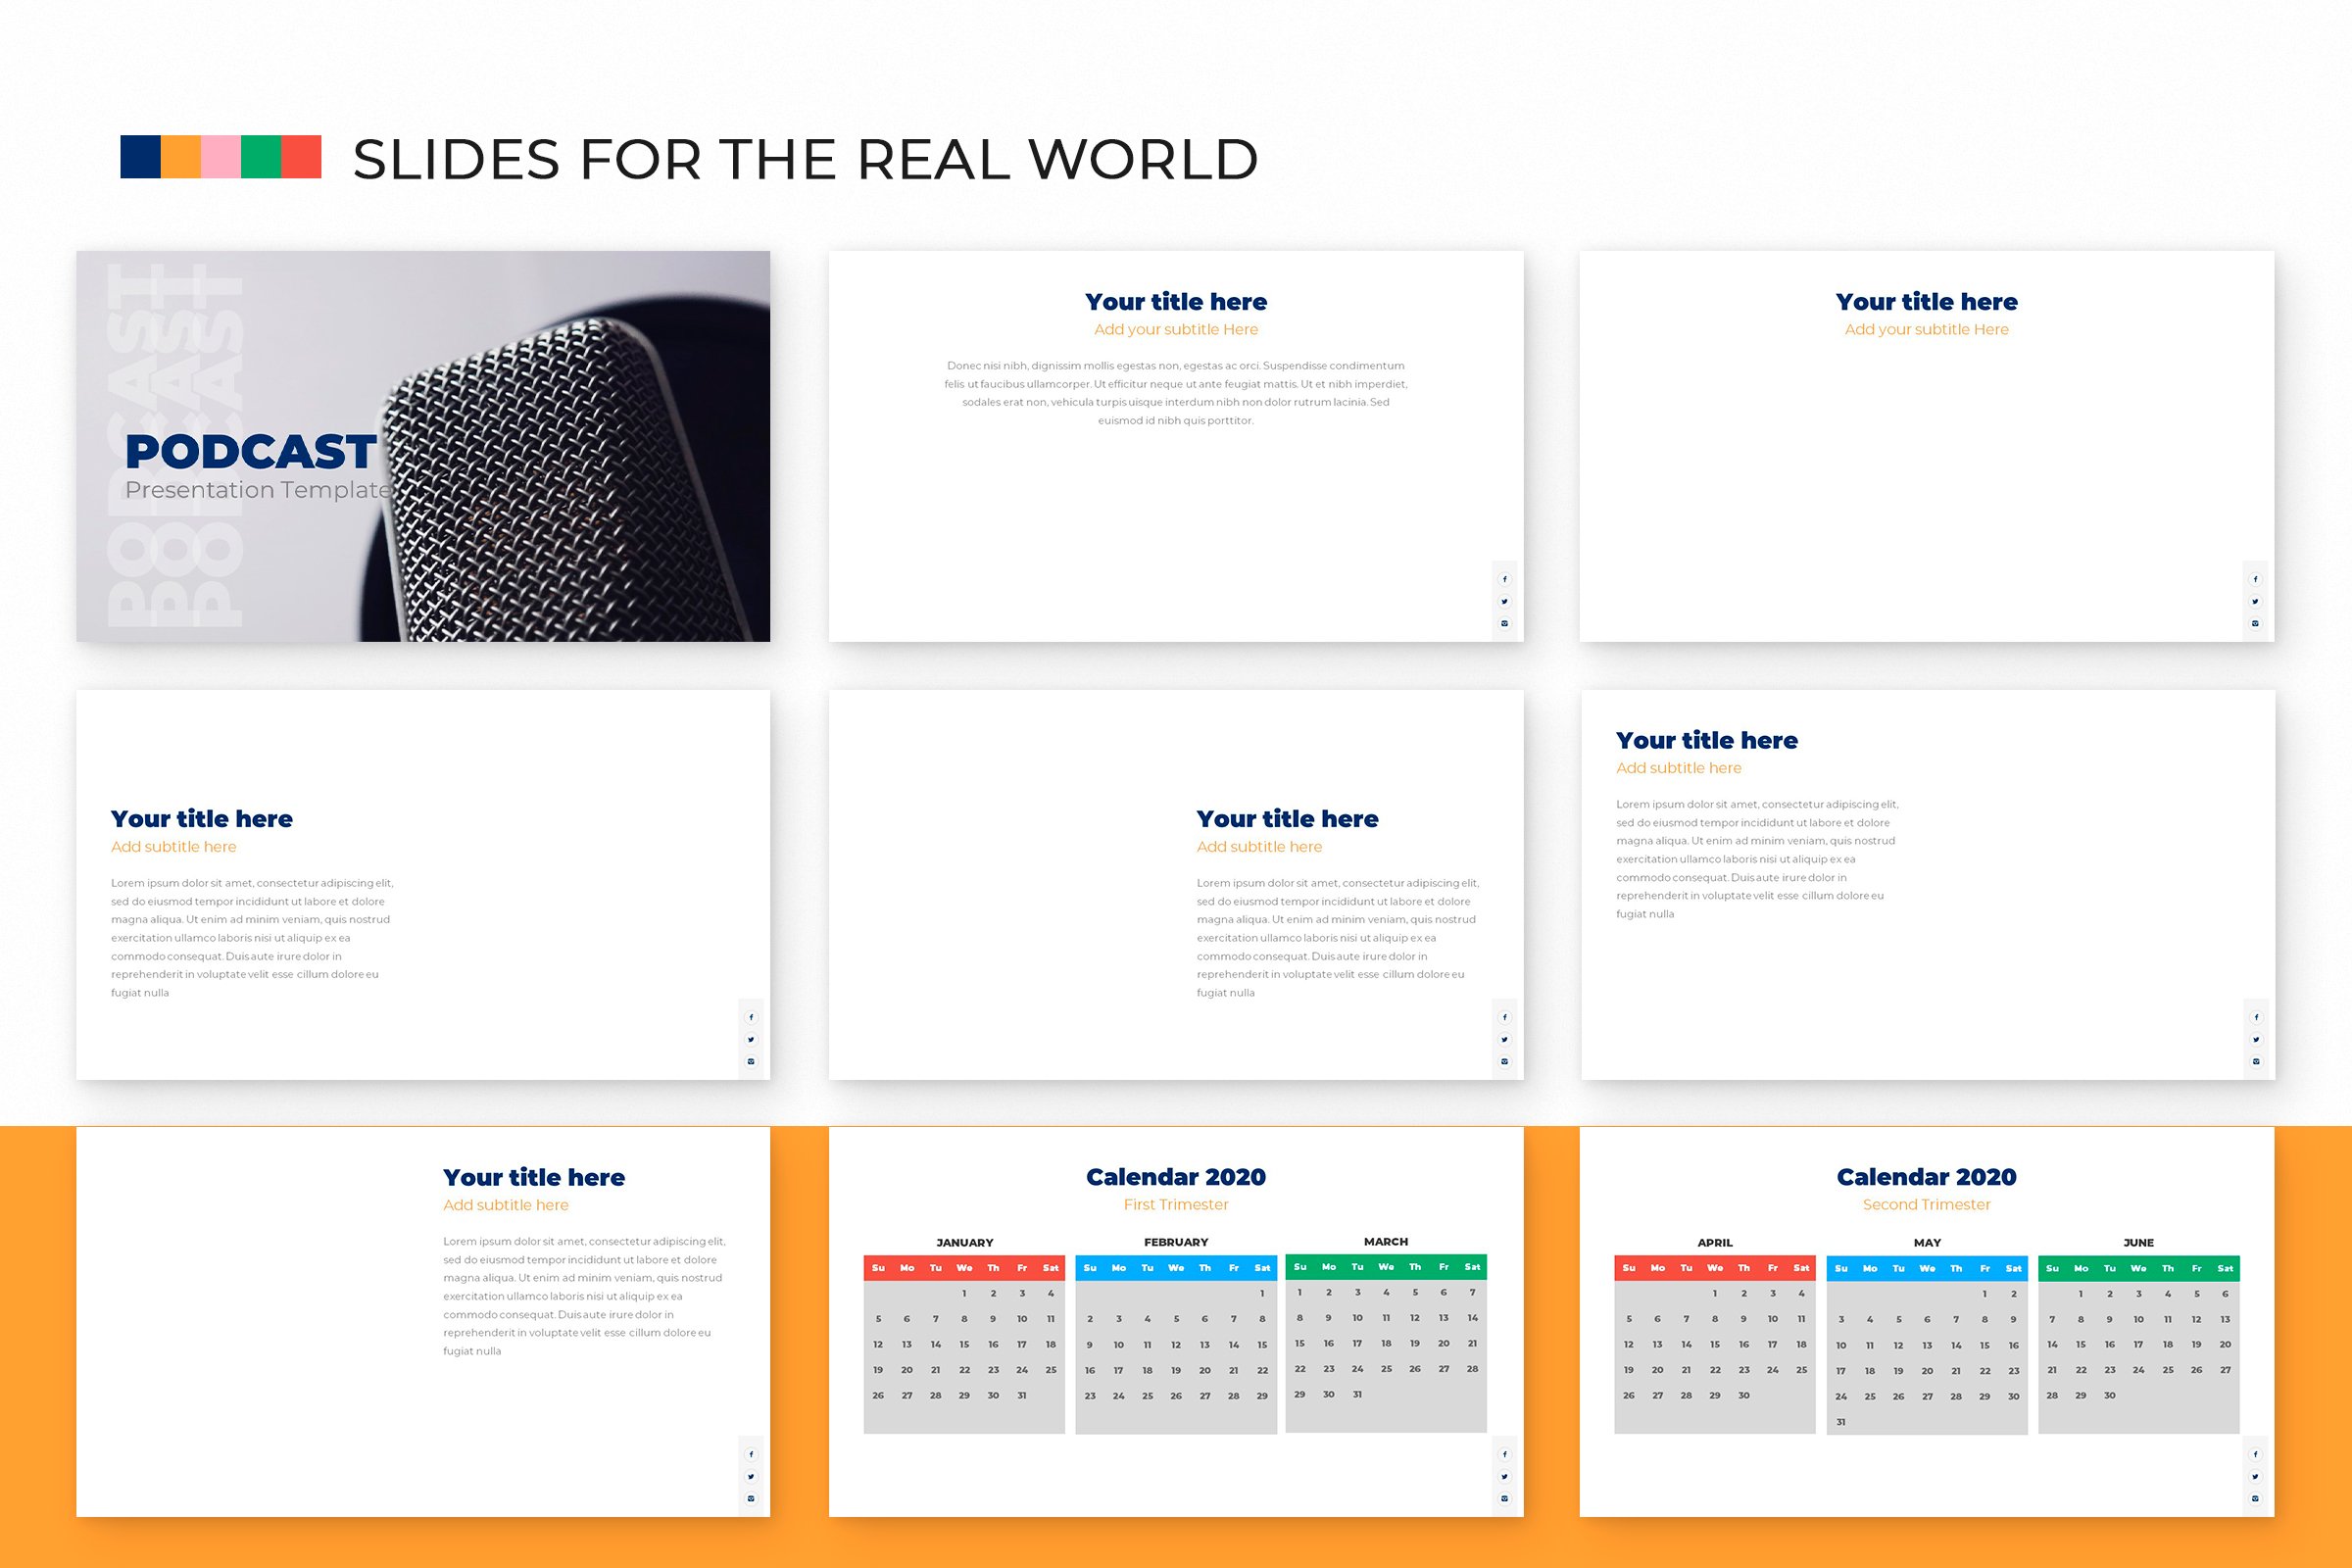 Podcast Powerpoint Template